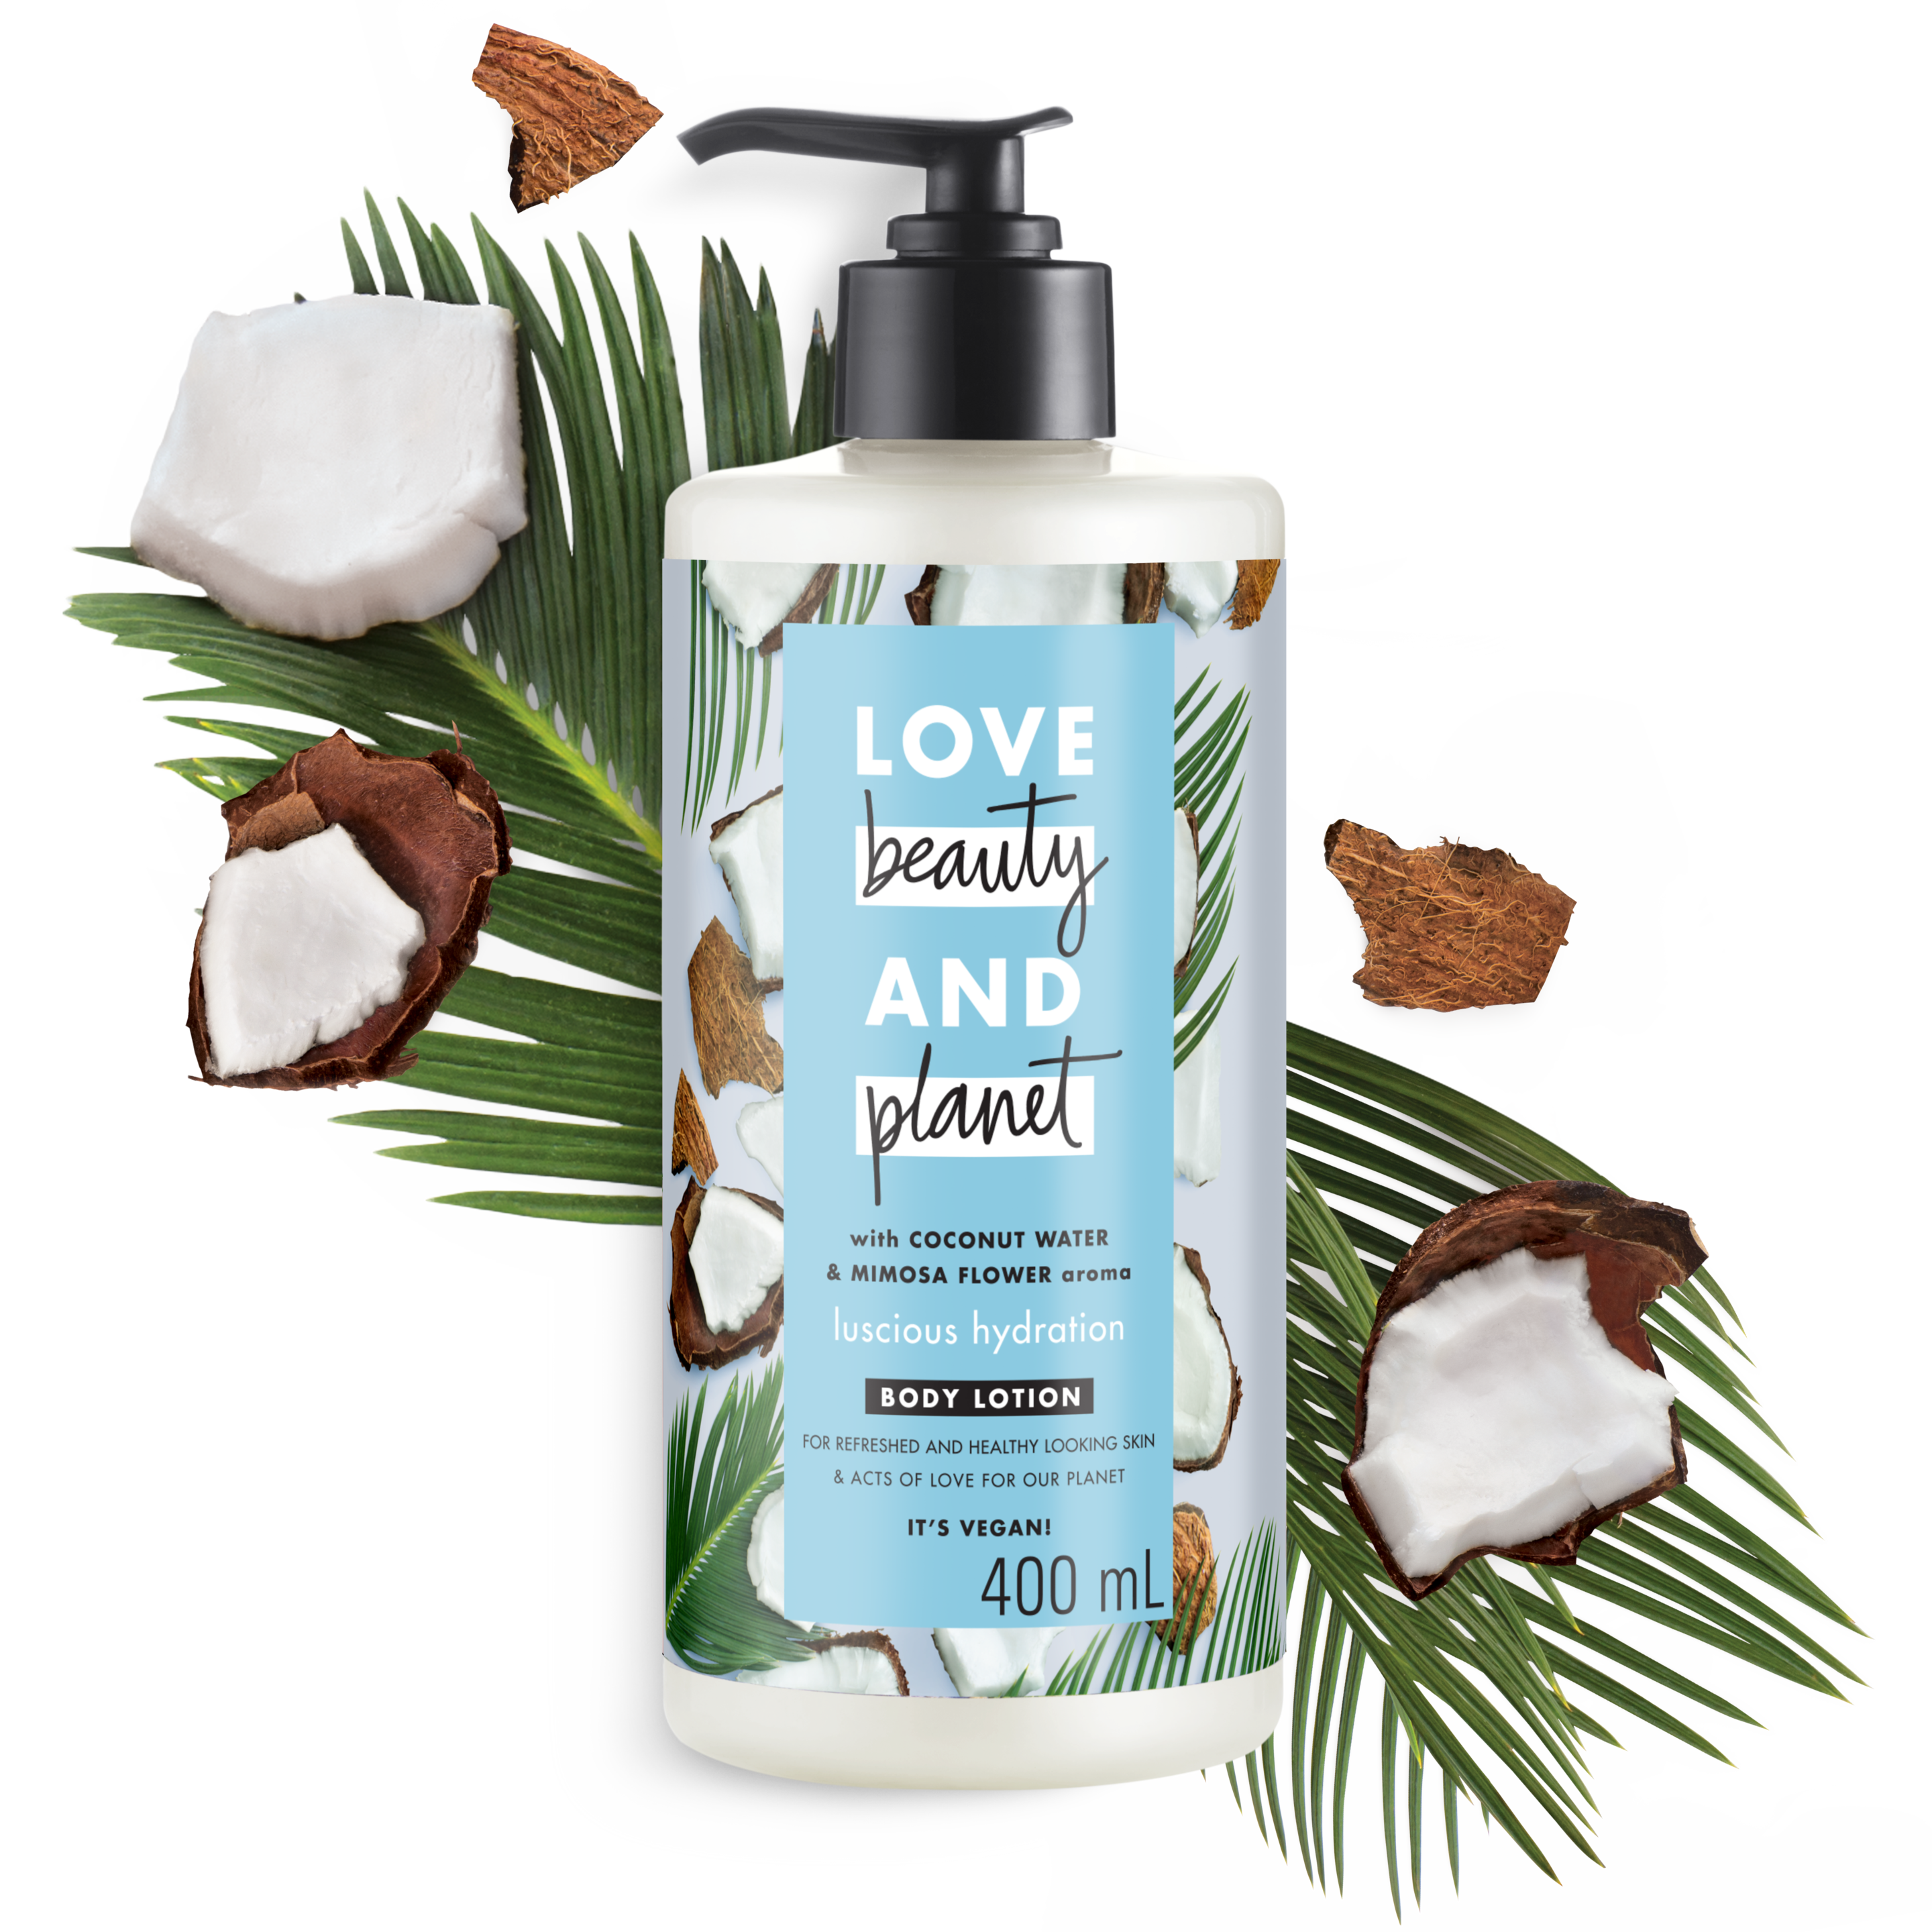 coconut water & mimosa flower body lotion